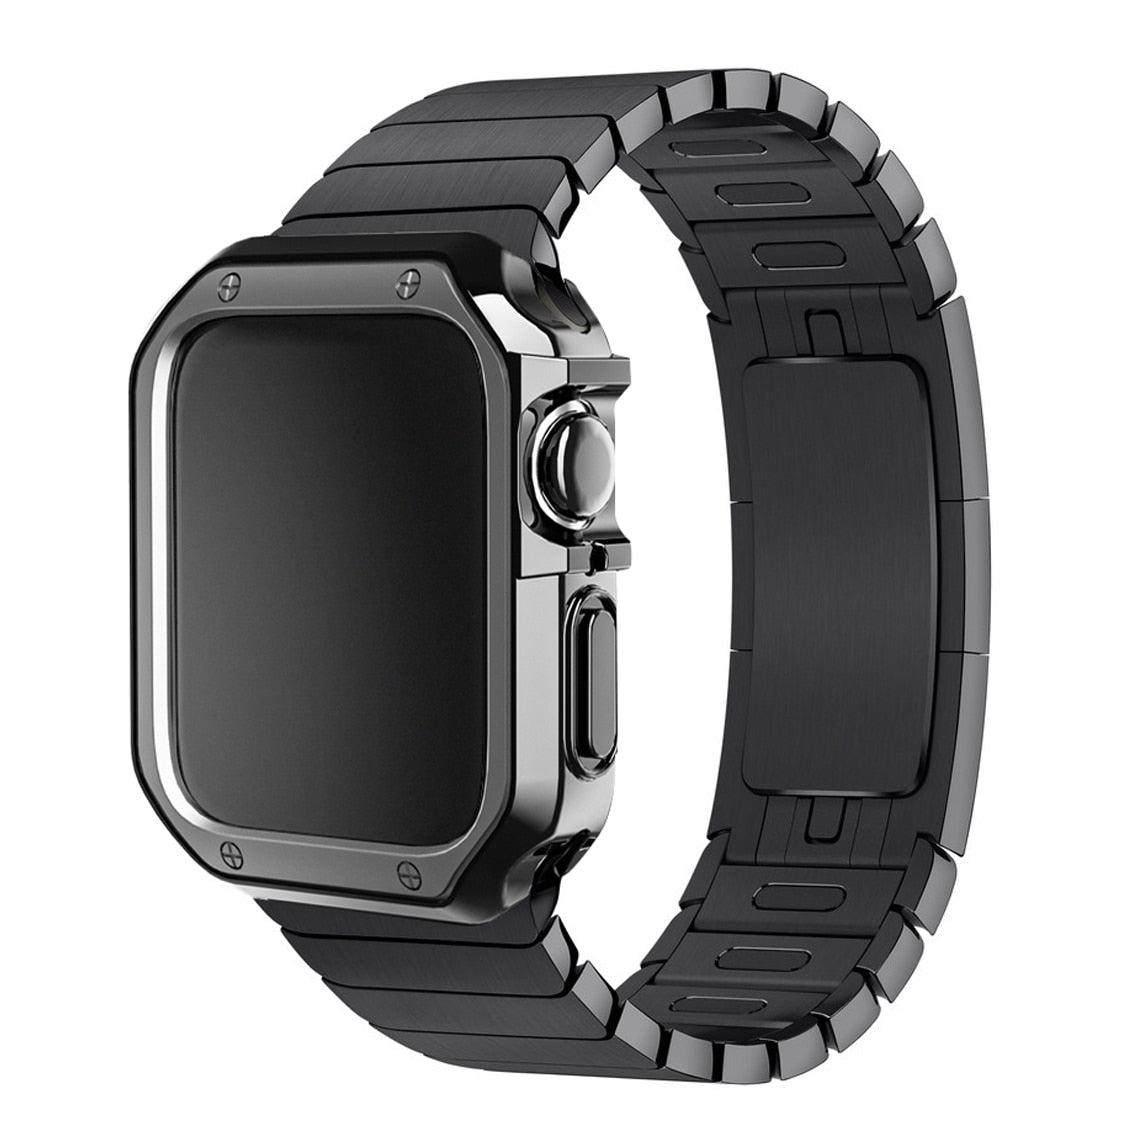 Link Bracelet with Silicone Case for Apple Watch - watchband.direct